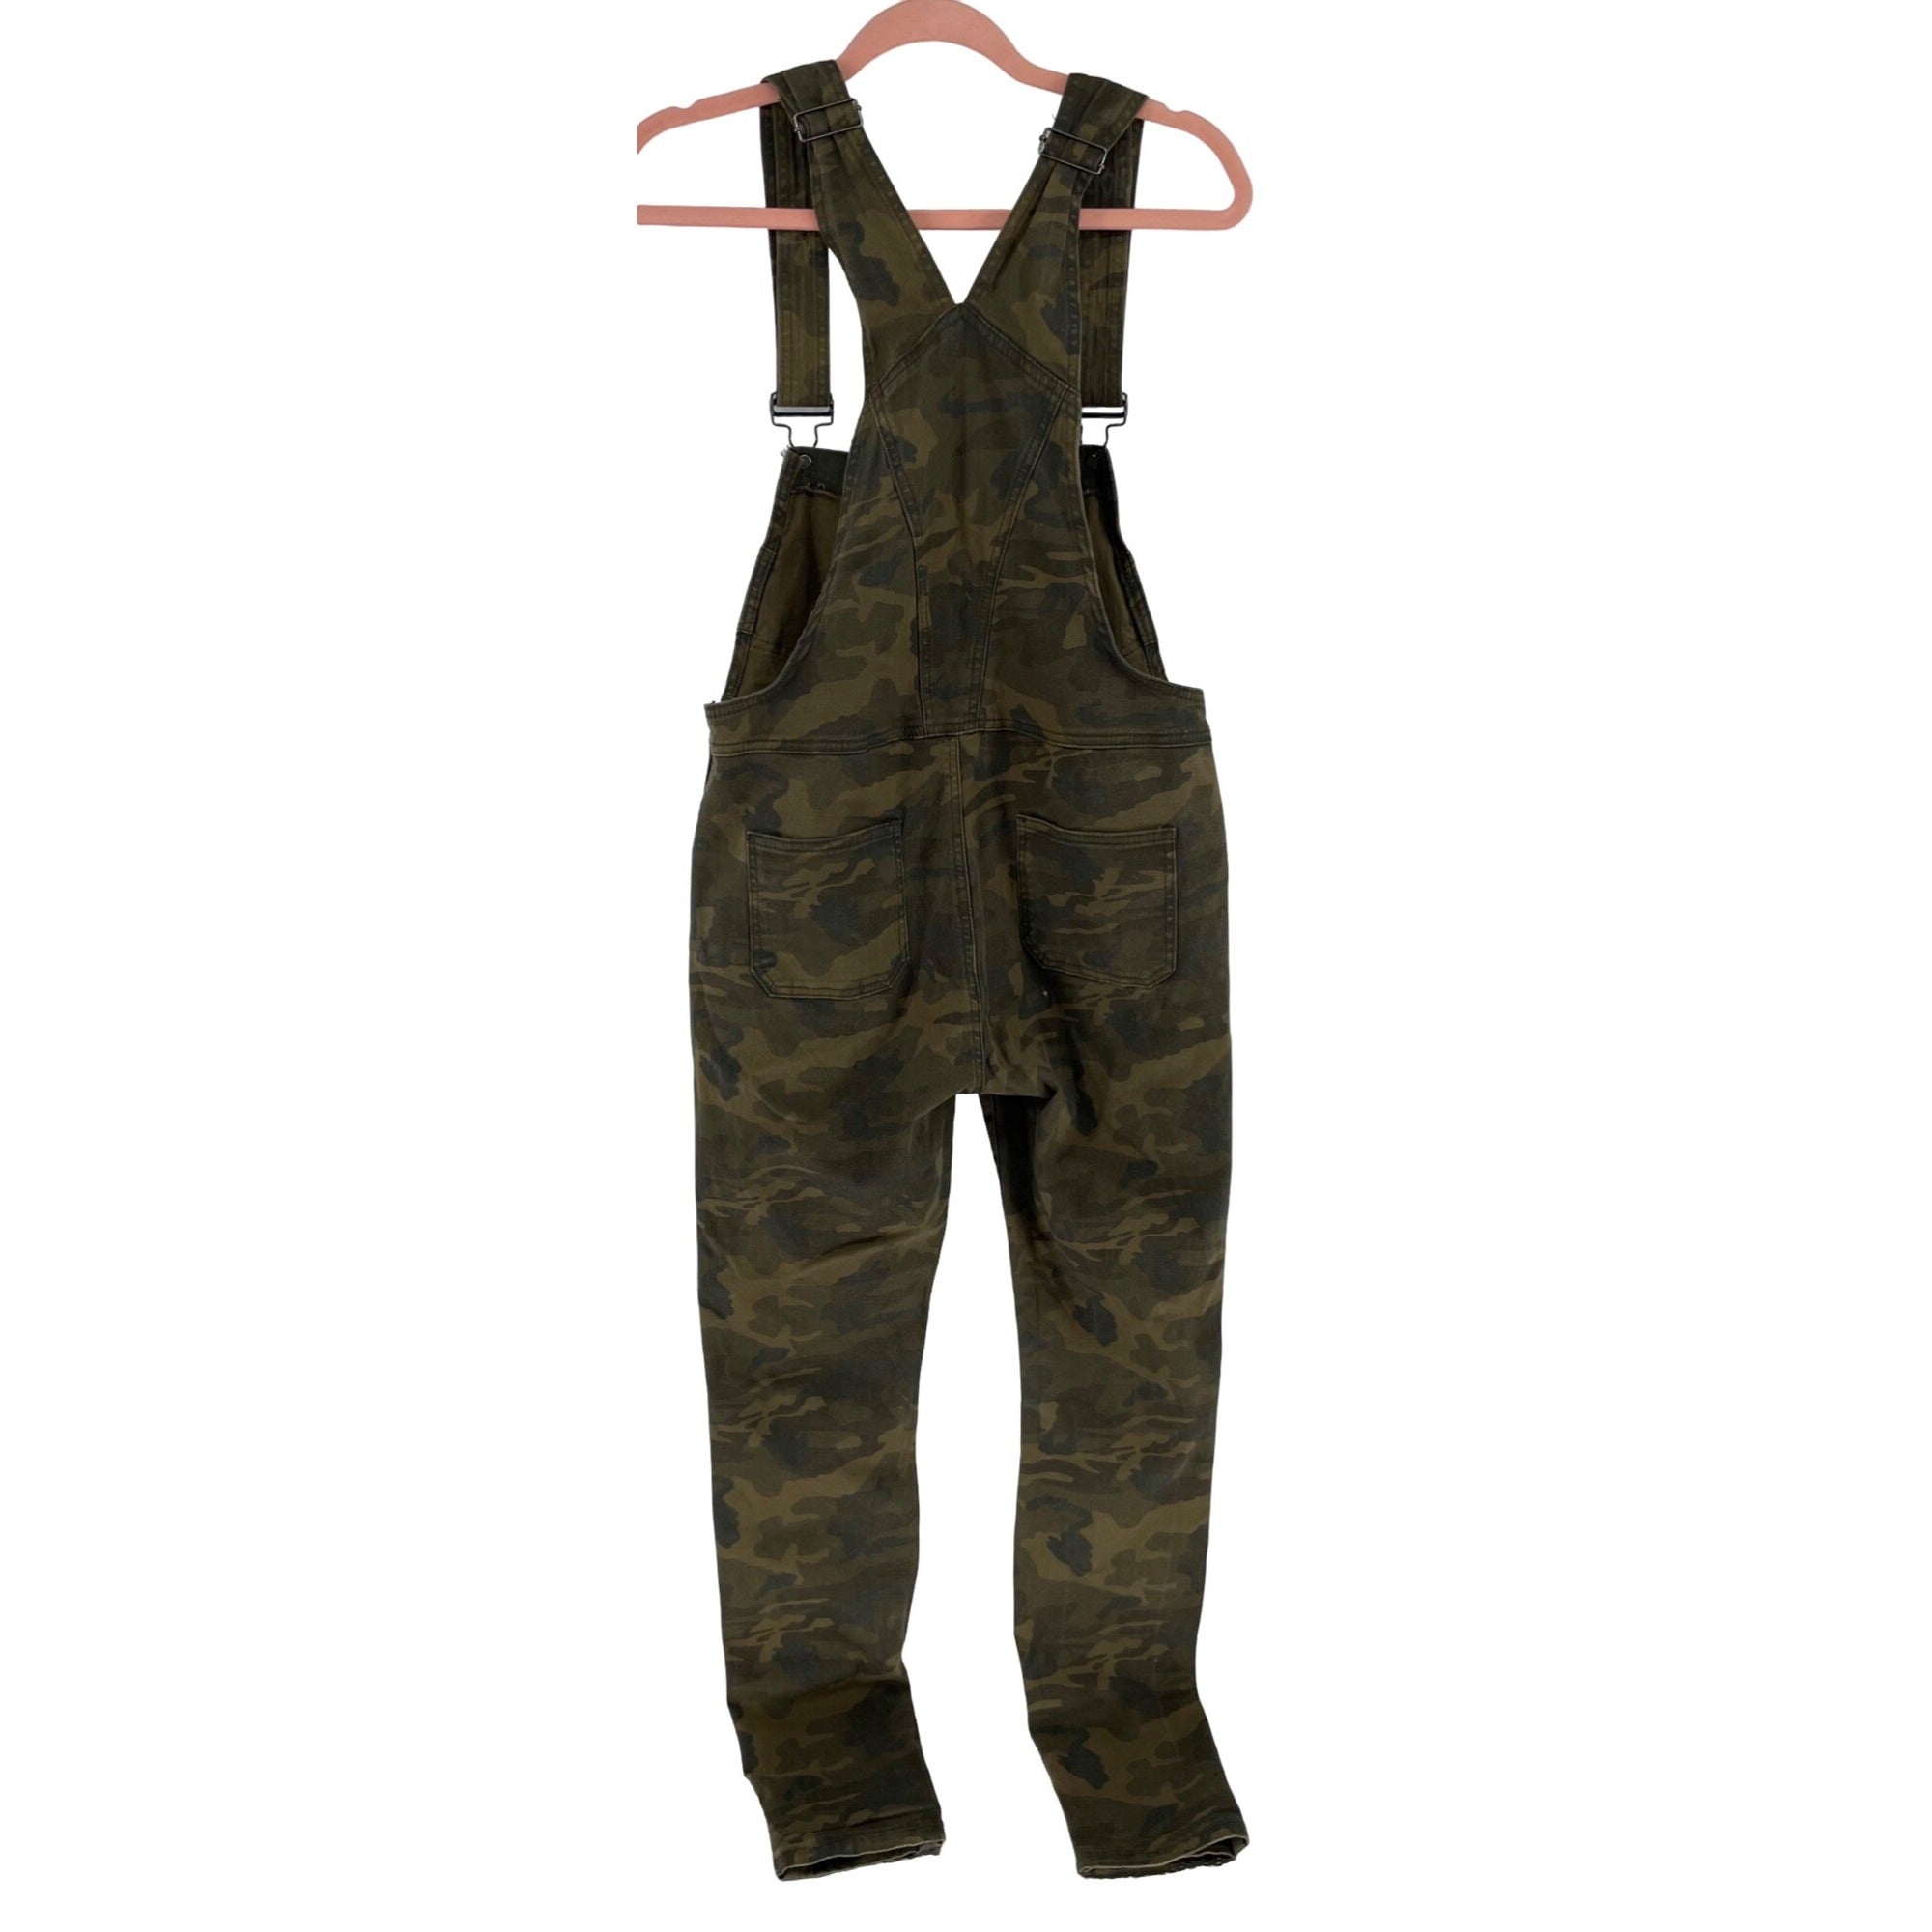 American Bazi Women's Size Large Army Green Military Skinny Distressed Dungarees/Overalls